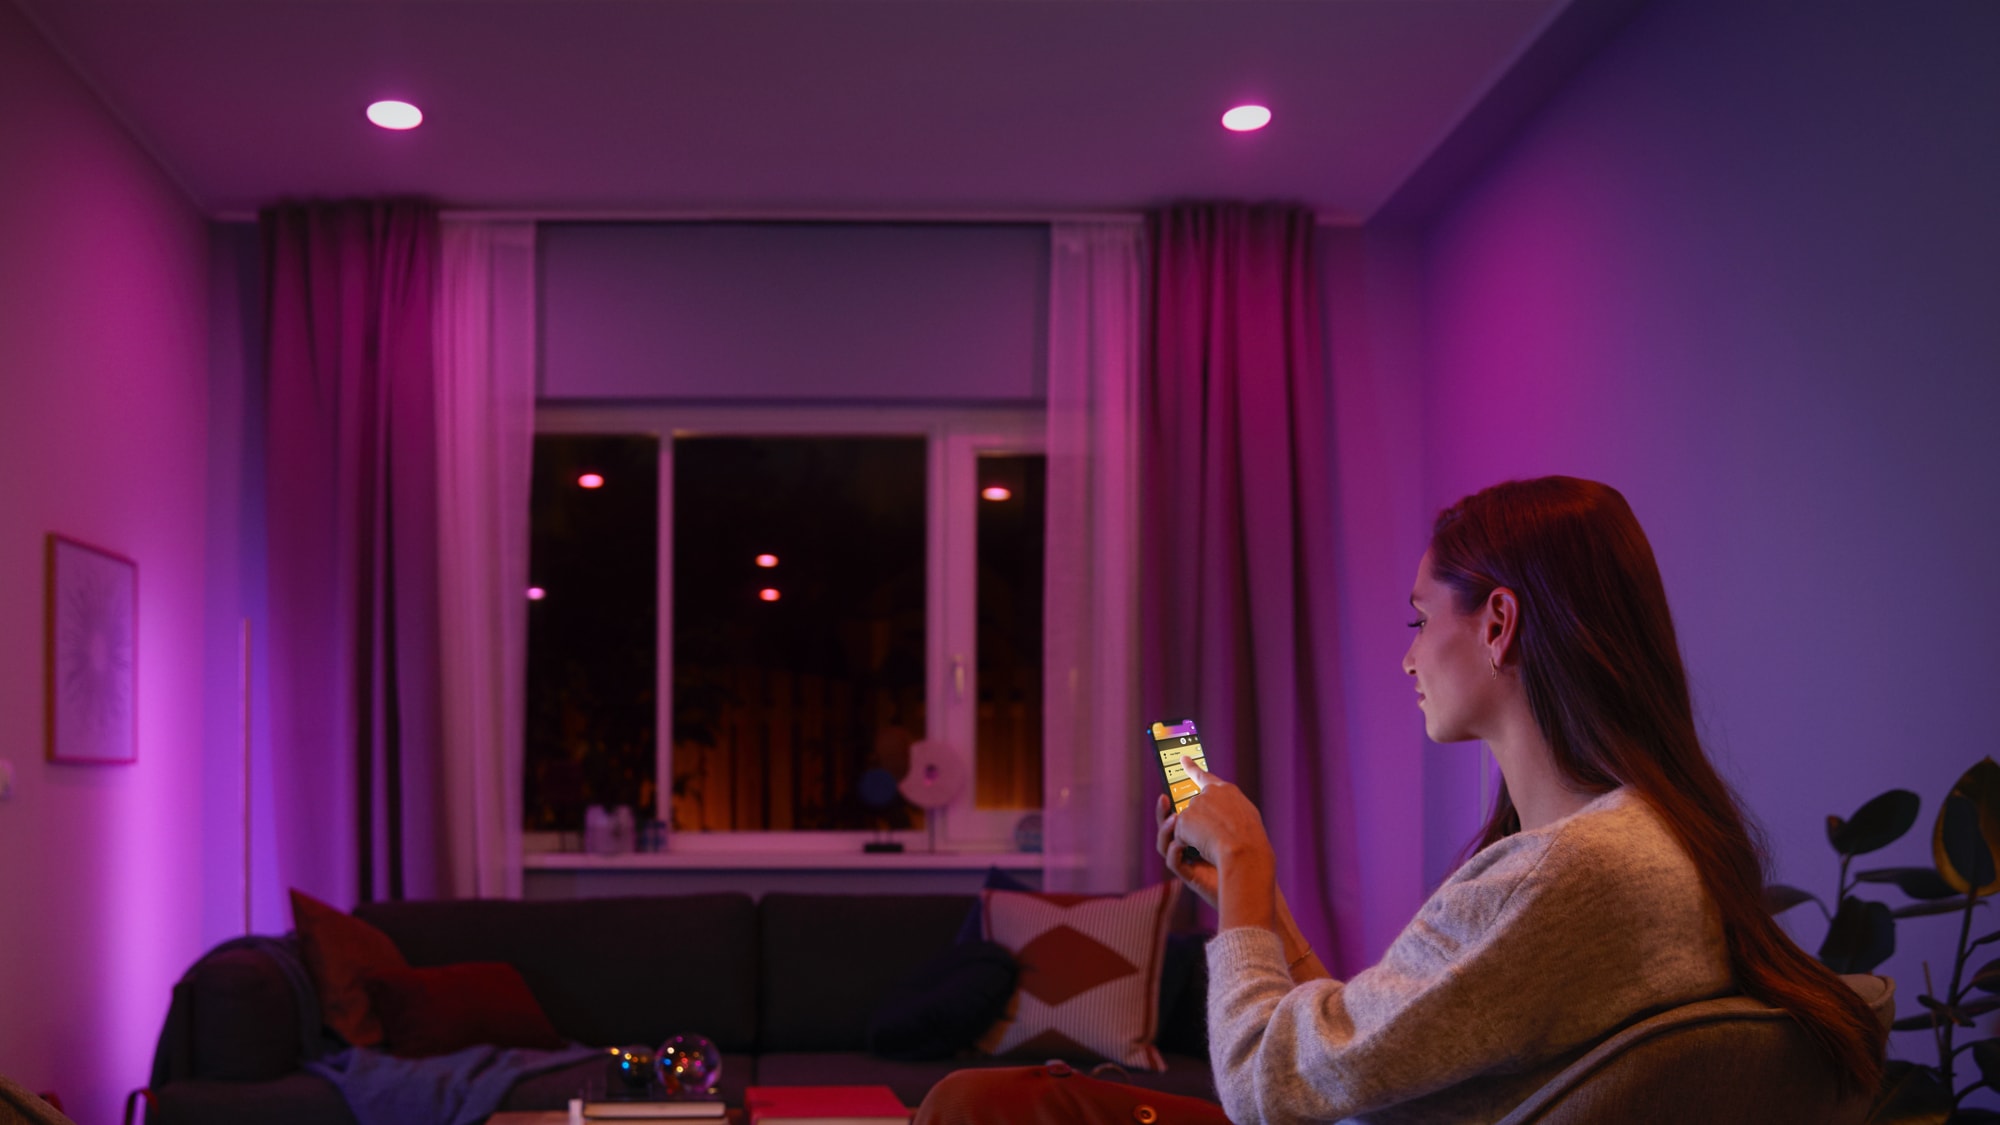 This Color-Changing Philips Hue Light Bulb Helps Me Fall Asleep